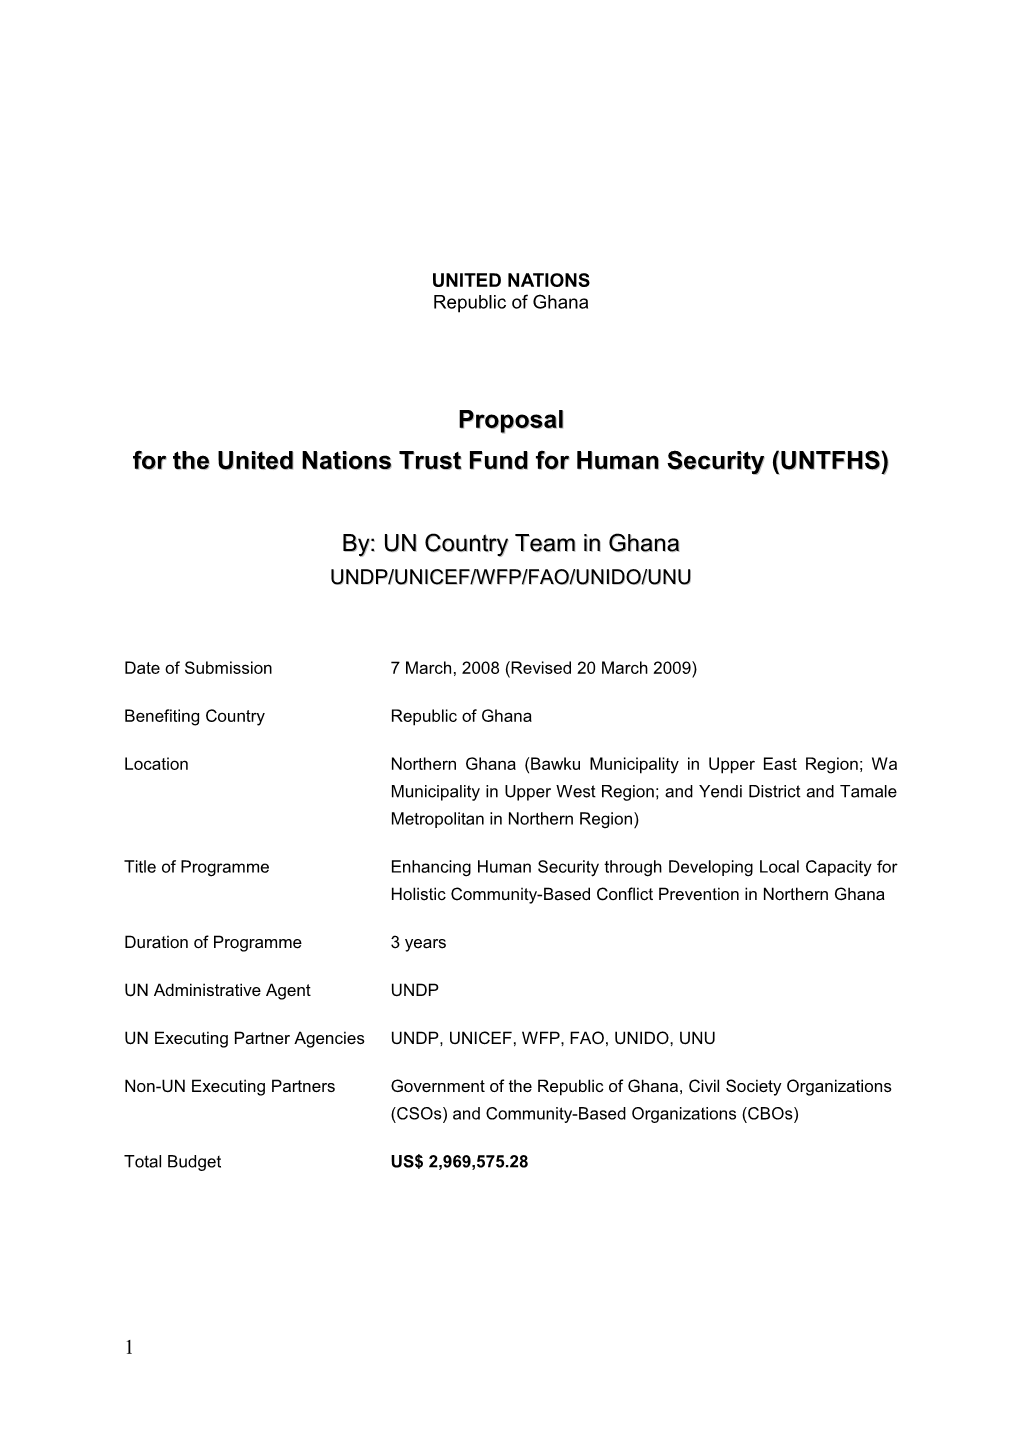 The United Nations Trust Fund for Human Security (UNTFHS)